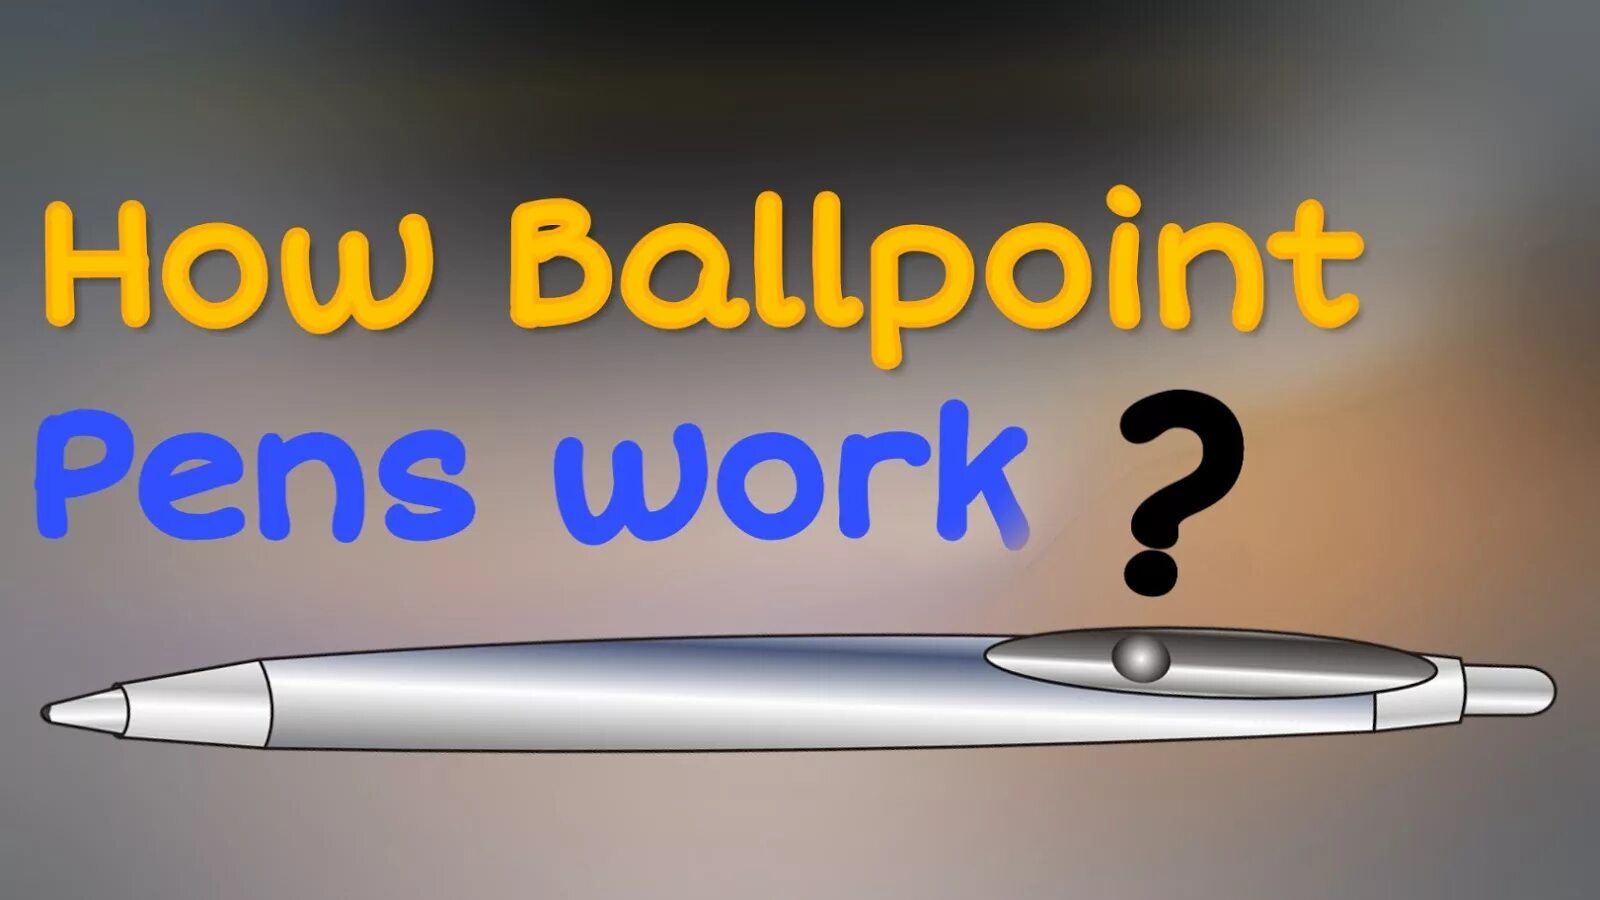 Pen works. Writing Ballpoint Pens. How the Ballpoint Pen was invented. Writing with a Ballpoint Pen. How a Rotary Ballpoint Pen works.